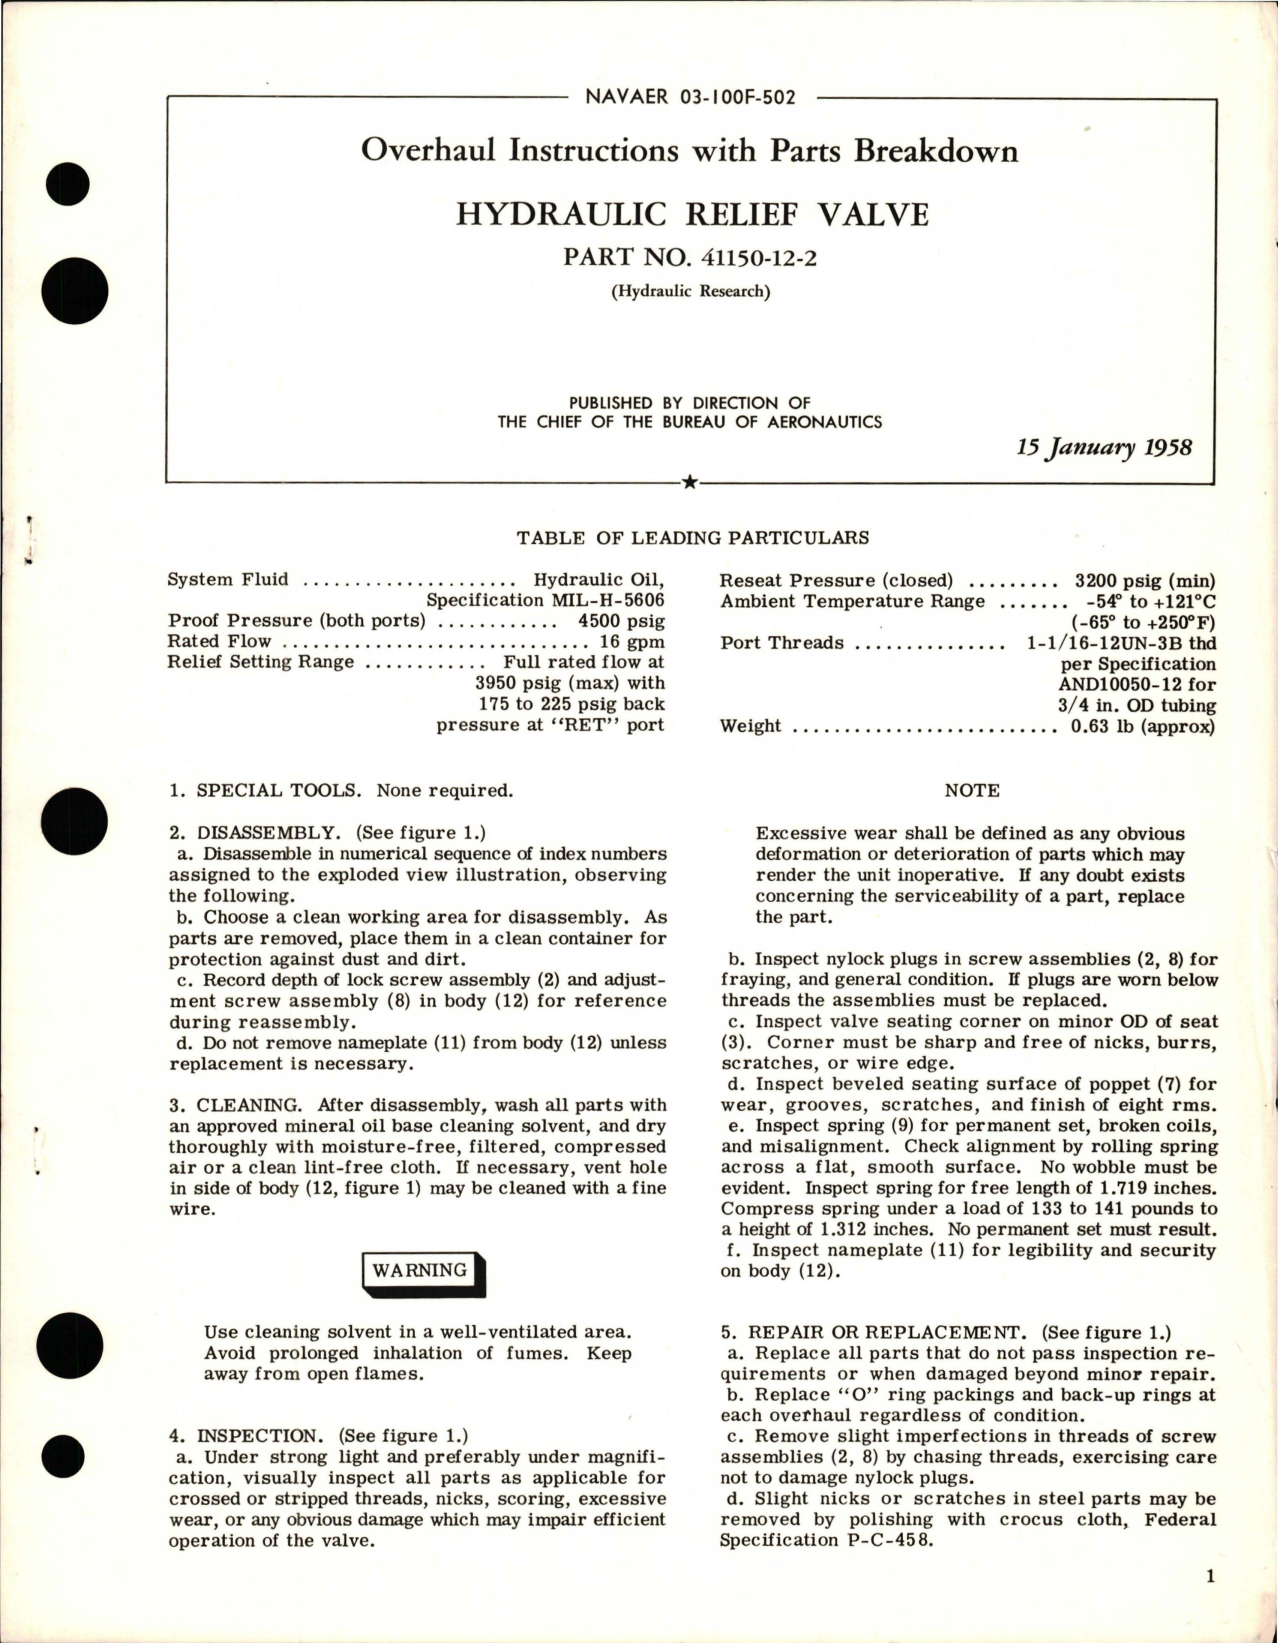 Sample page 1 from AirCorps Library document: Overhaul Instructions with Parts Breakdown for Hydraulic Relief Valve - Part 41150-12-2 